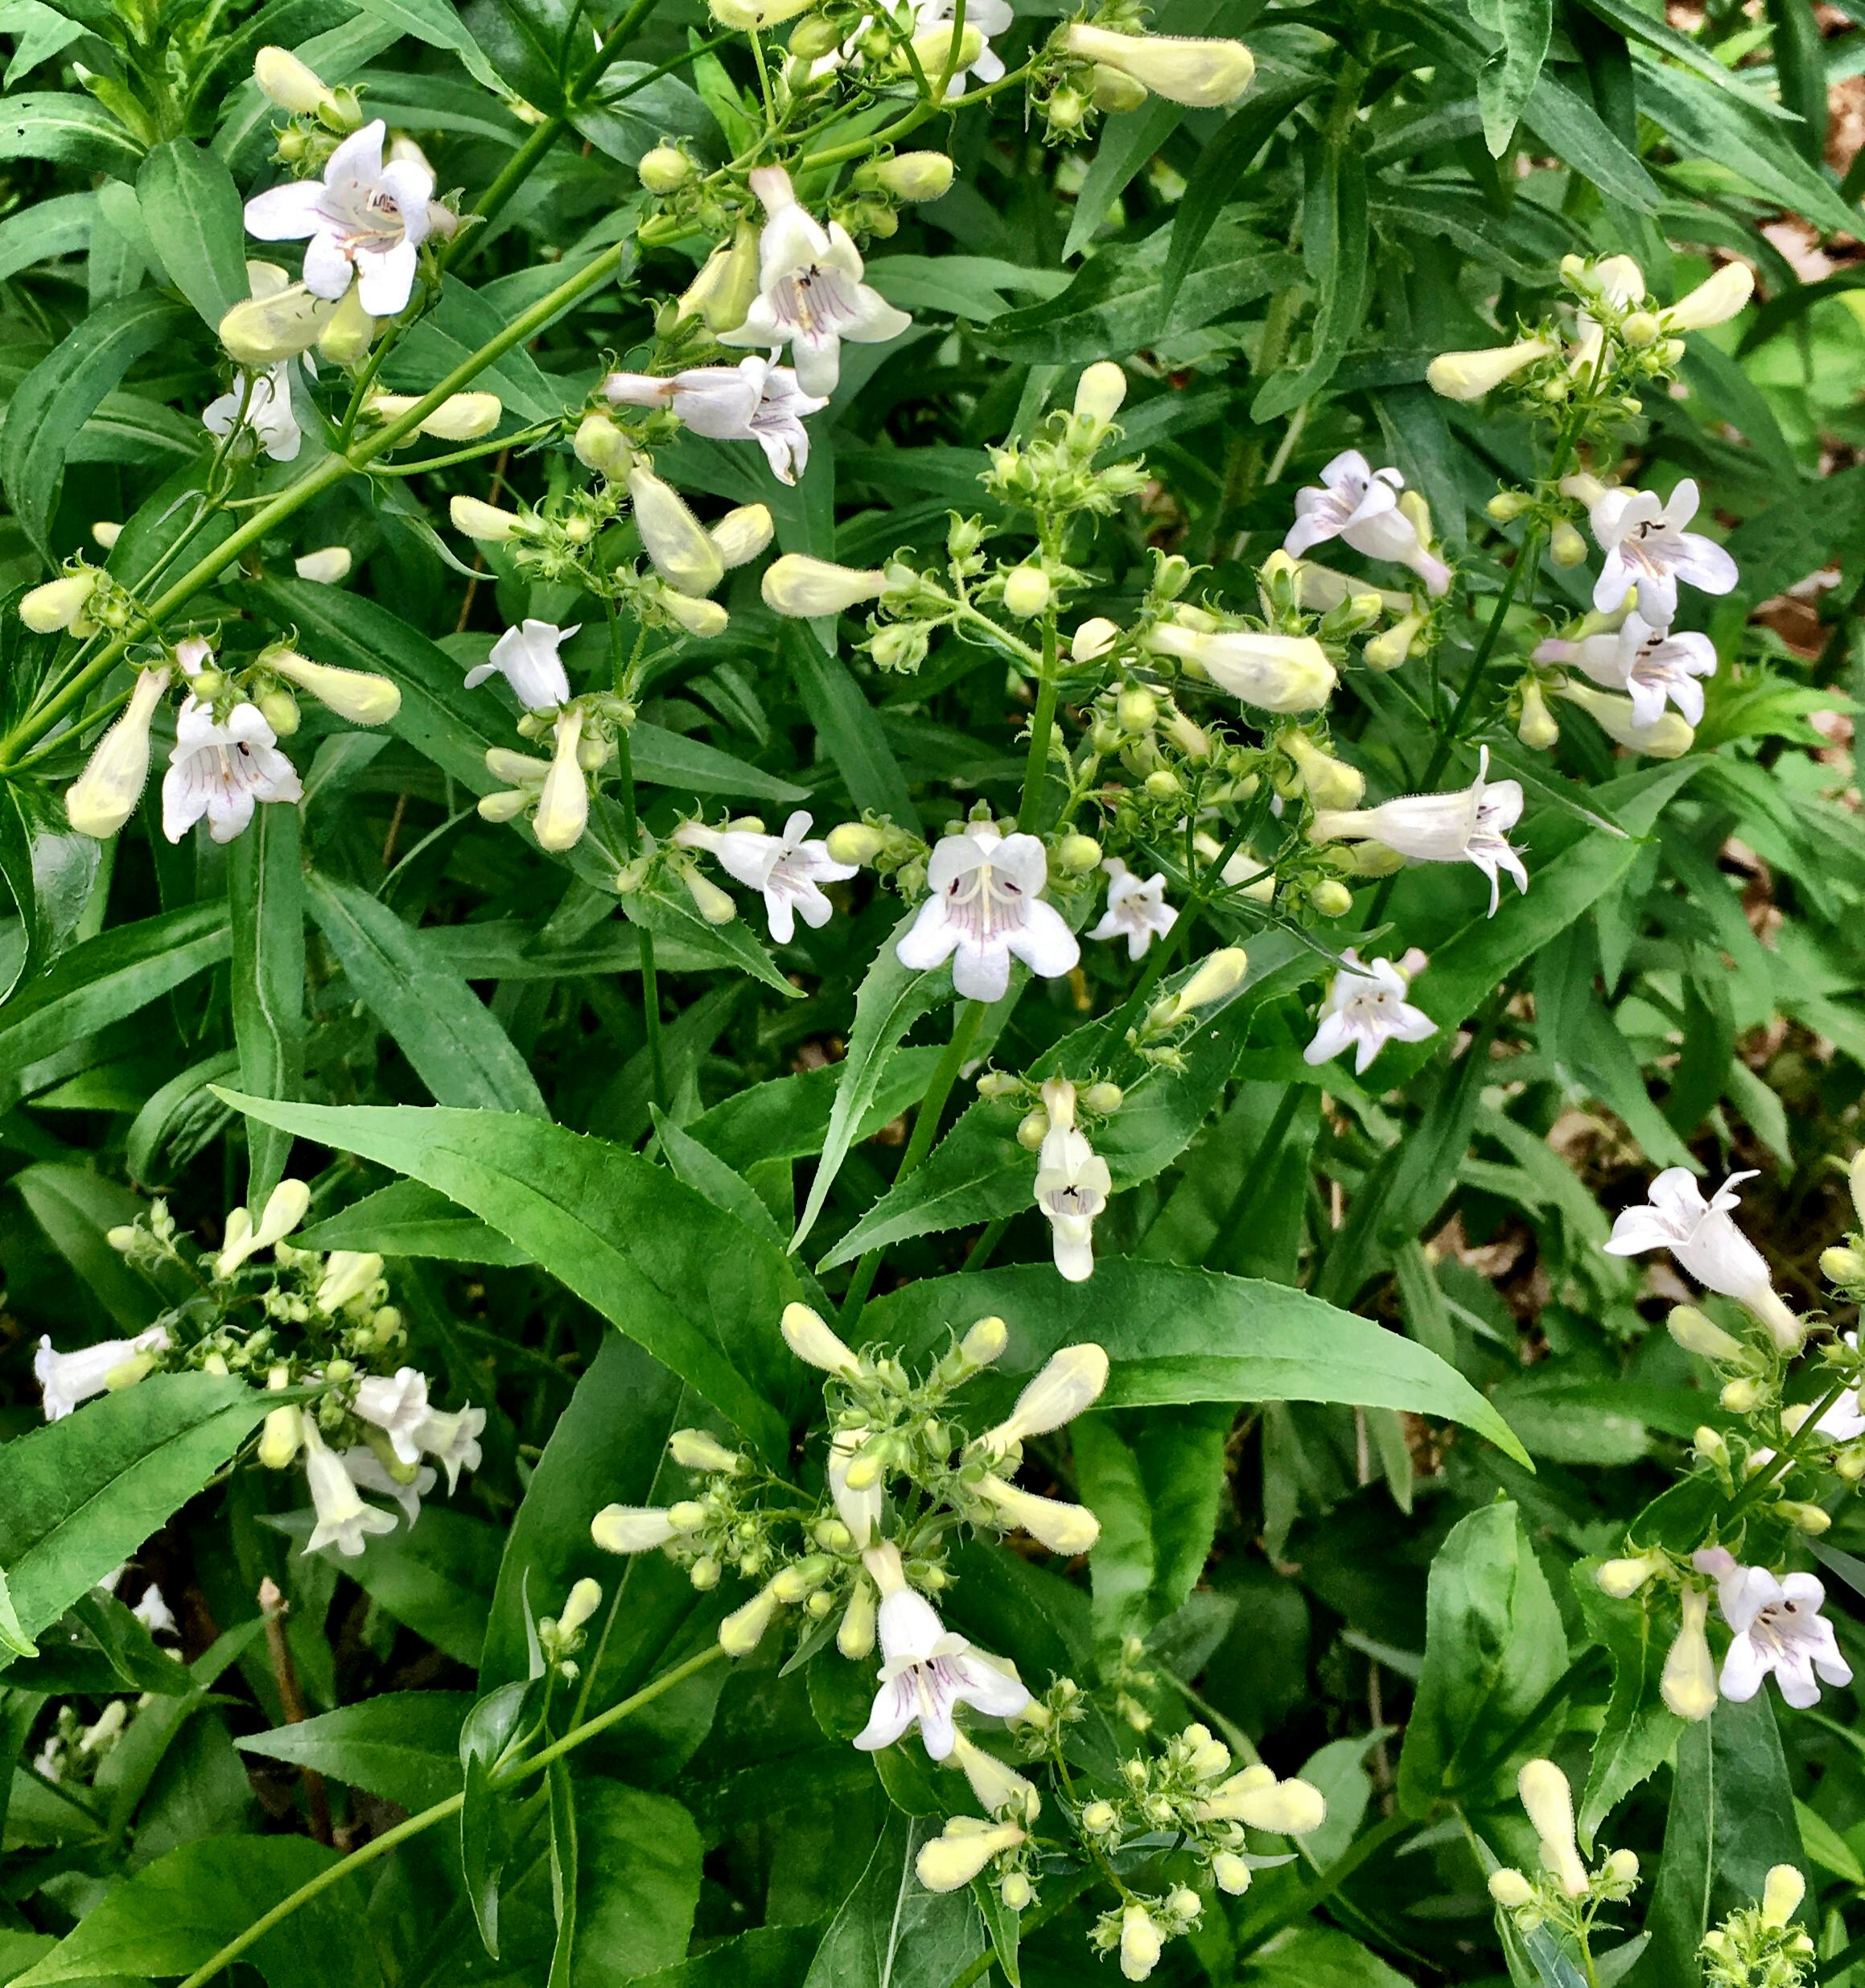 Penstemon digitalis blooming in June - This native plant attracts bees and hummingbirds